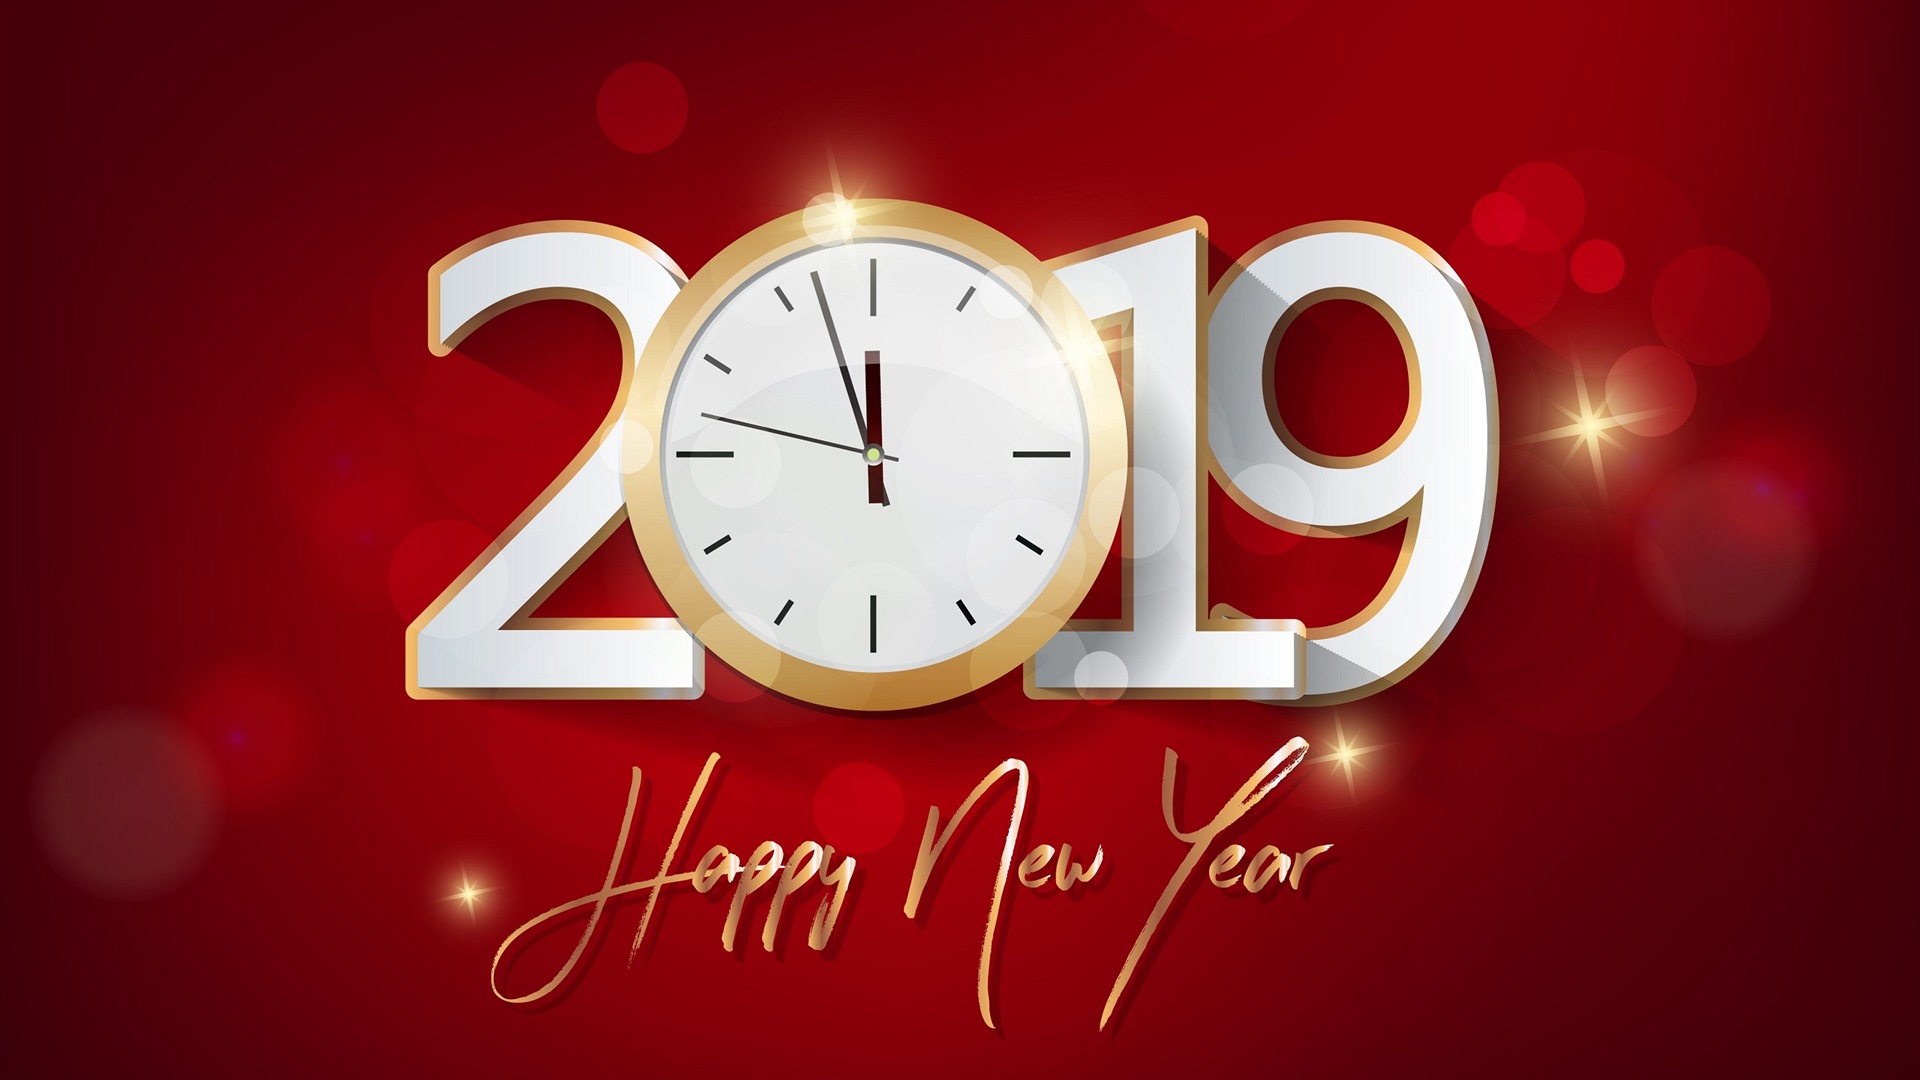 Happy New Year 2019 HD wallpapers #8 - 1920x1080